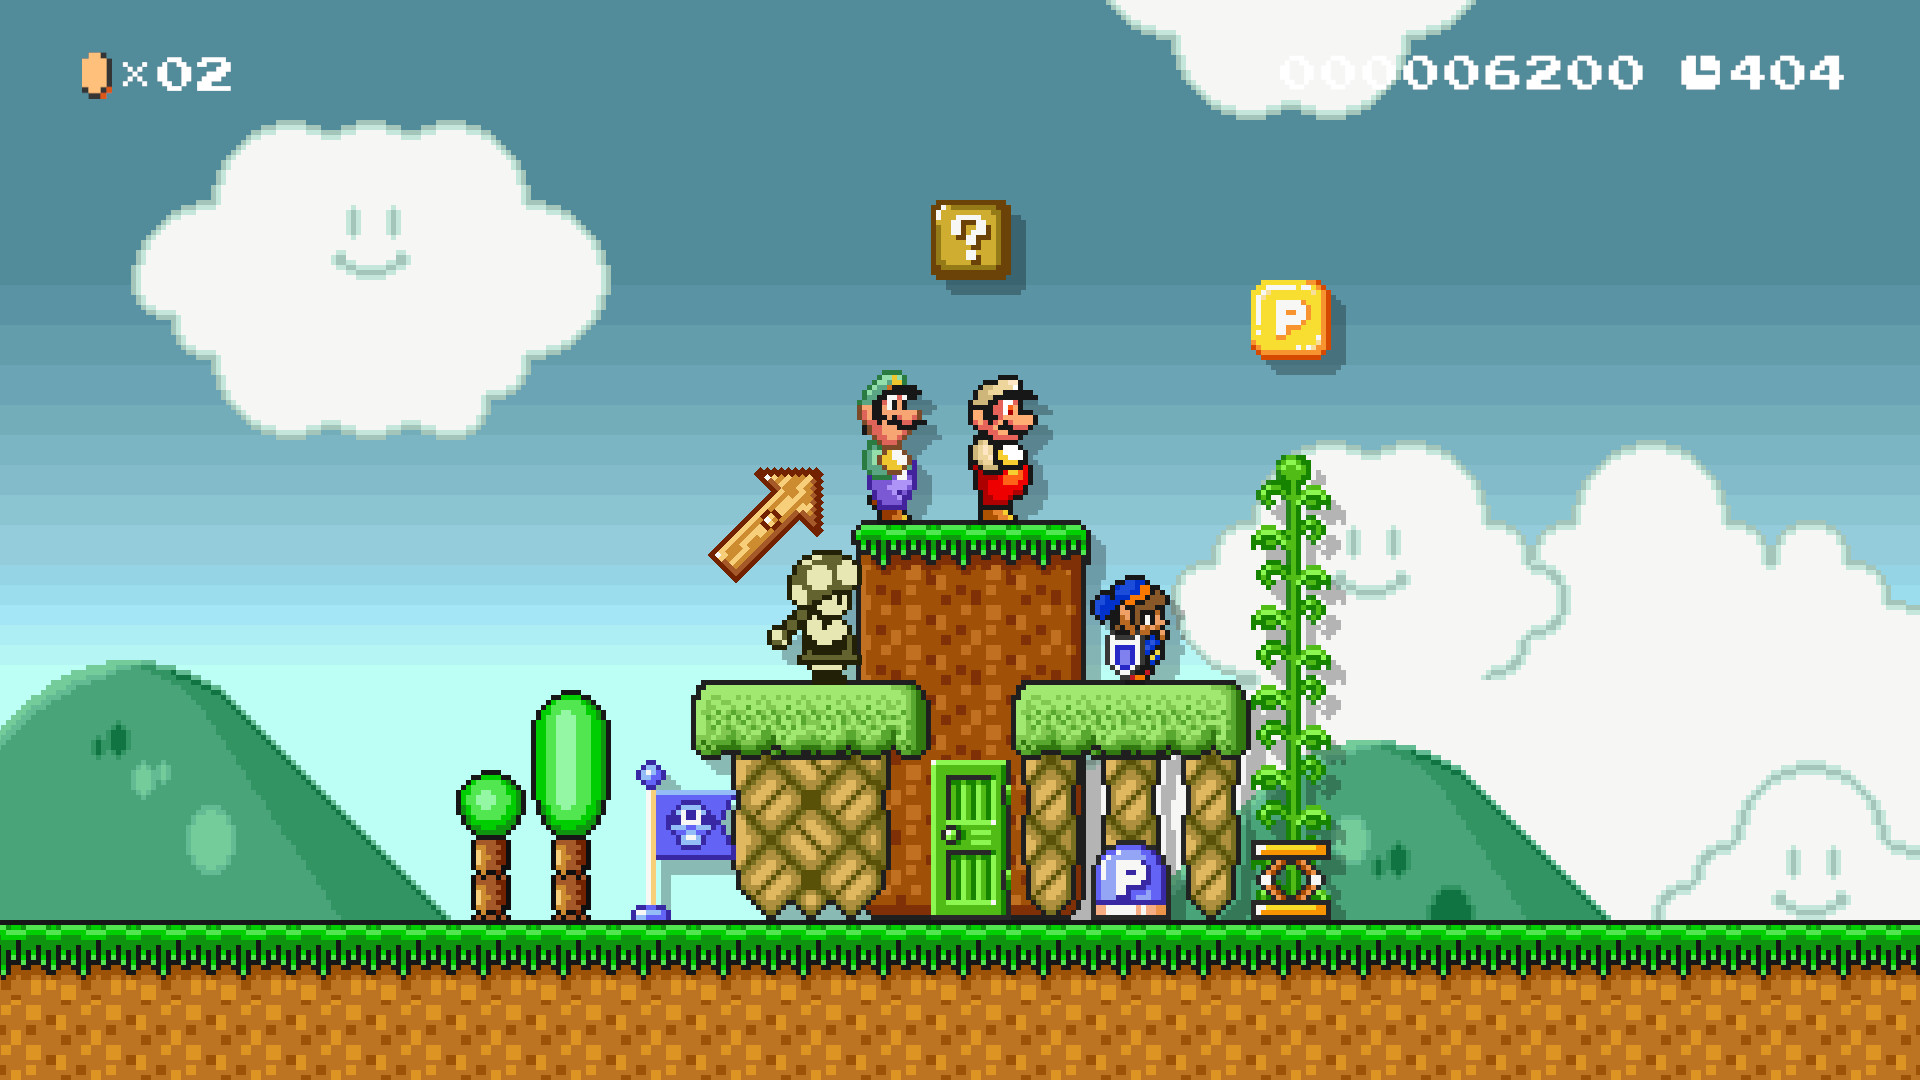 Super Mario All-Stars - Play Game Online